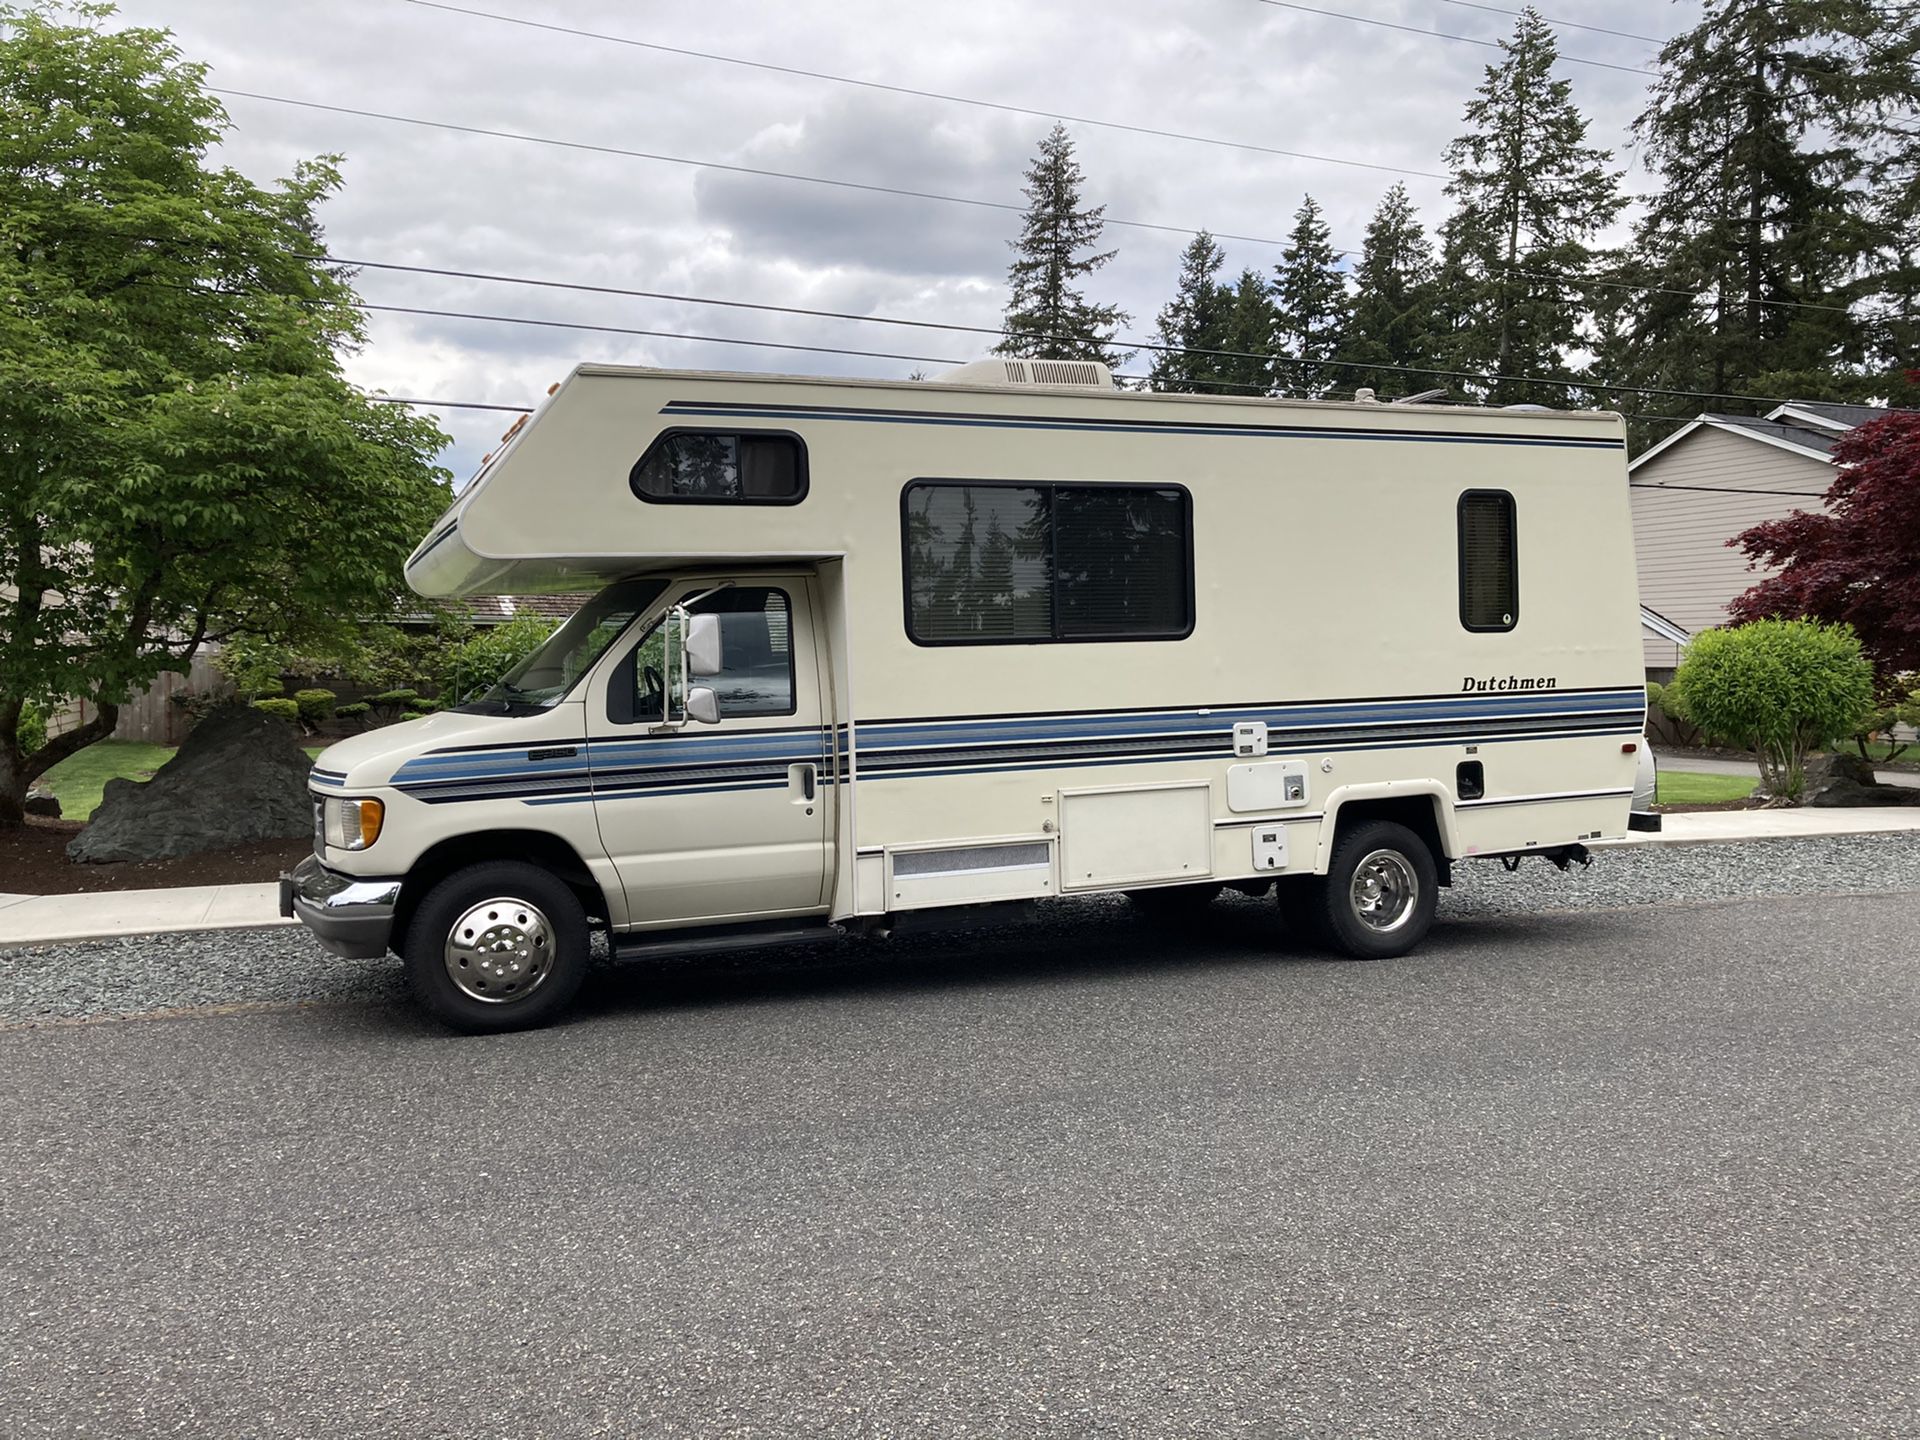 1998 Dutchman 22 foot class C motorhome Roof AC generator awning Ford chassis Low miles